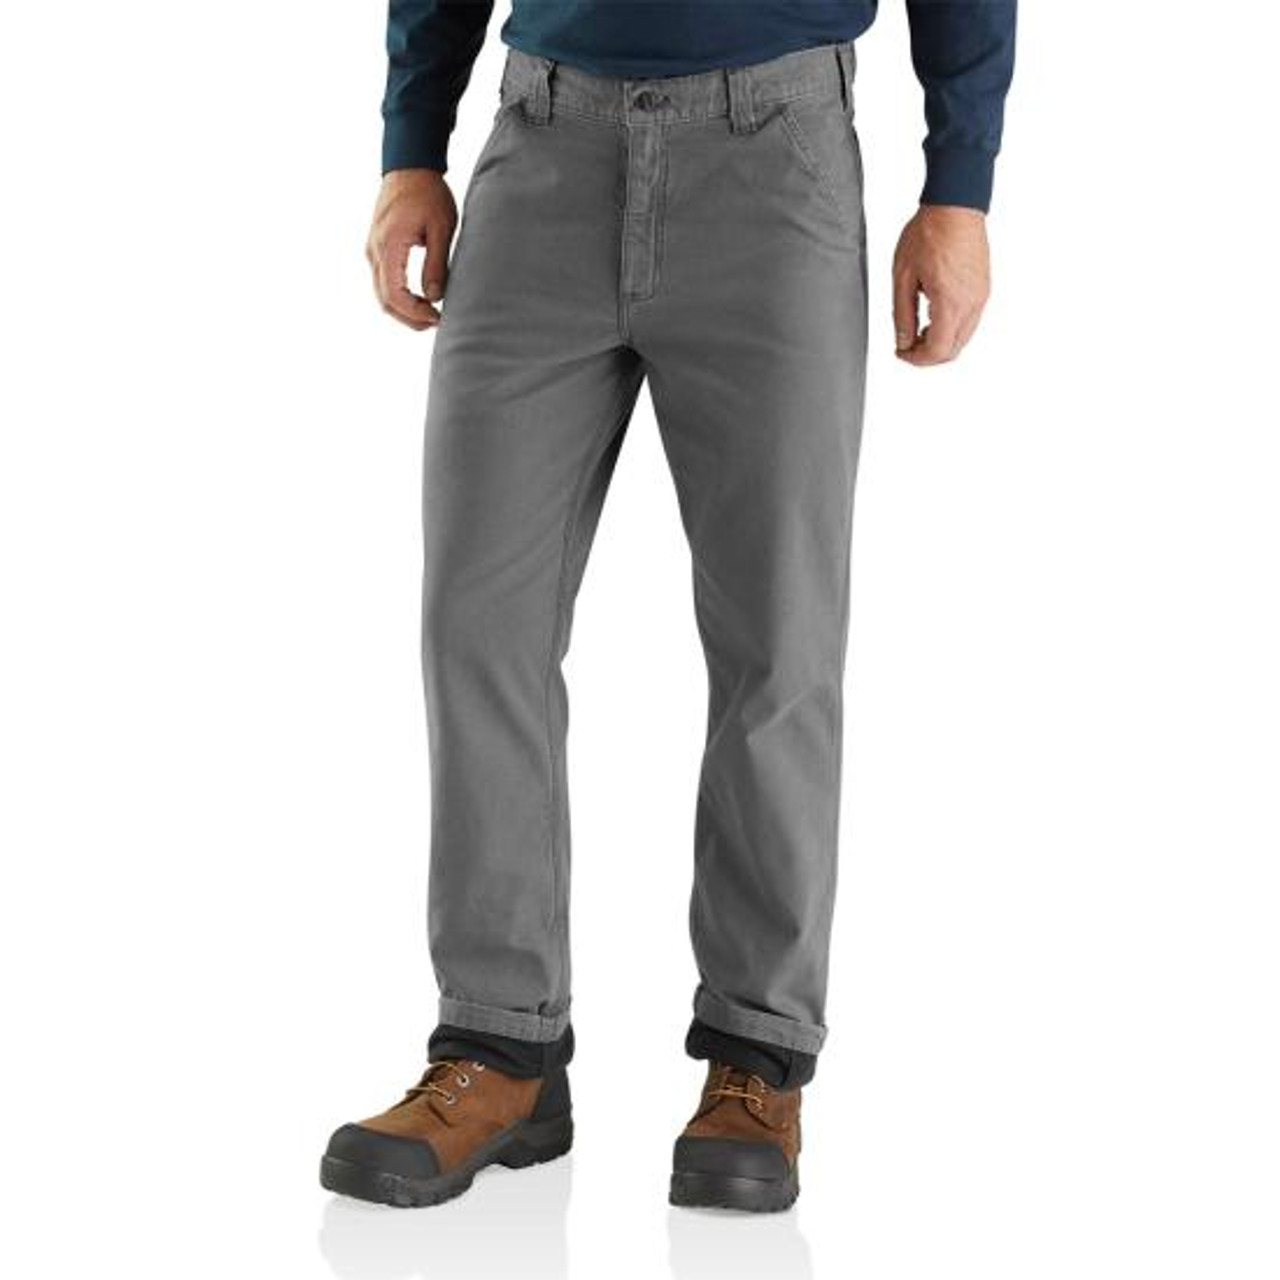 Carhartt Men's Professional Series Rugged Flex Relaxed Fit Canvas Work Pant